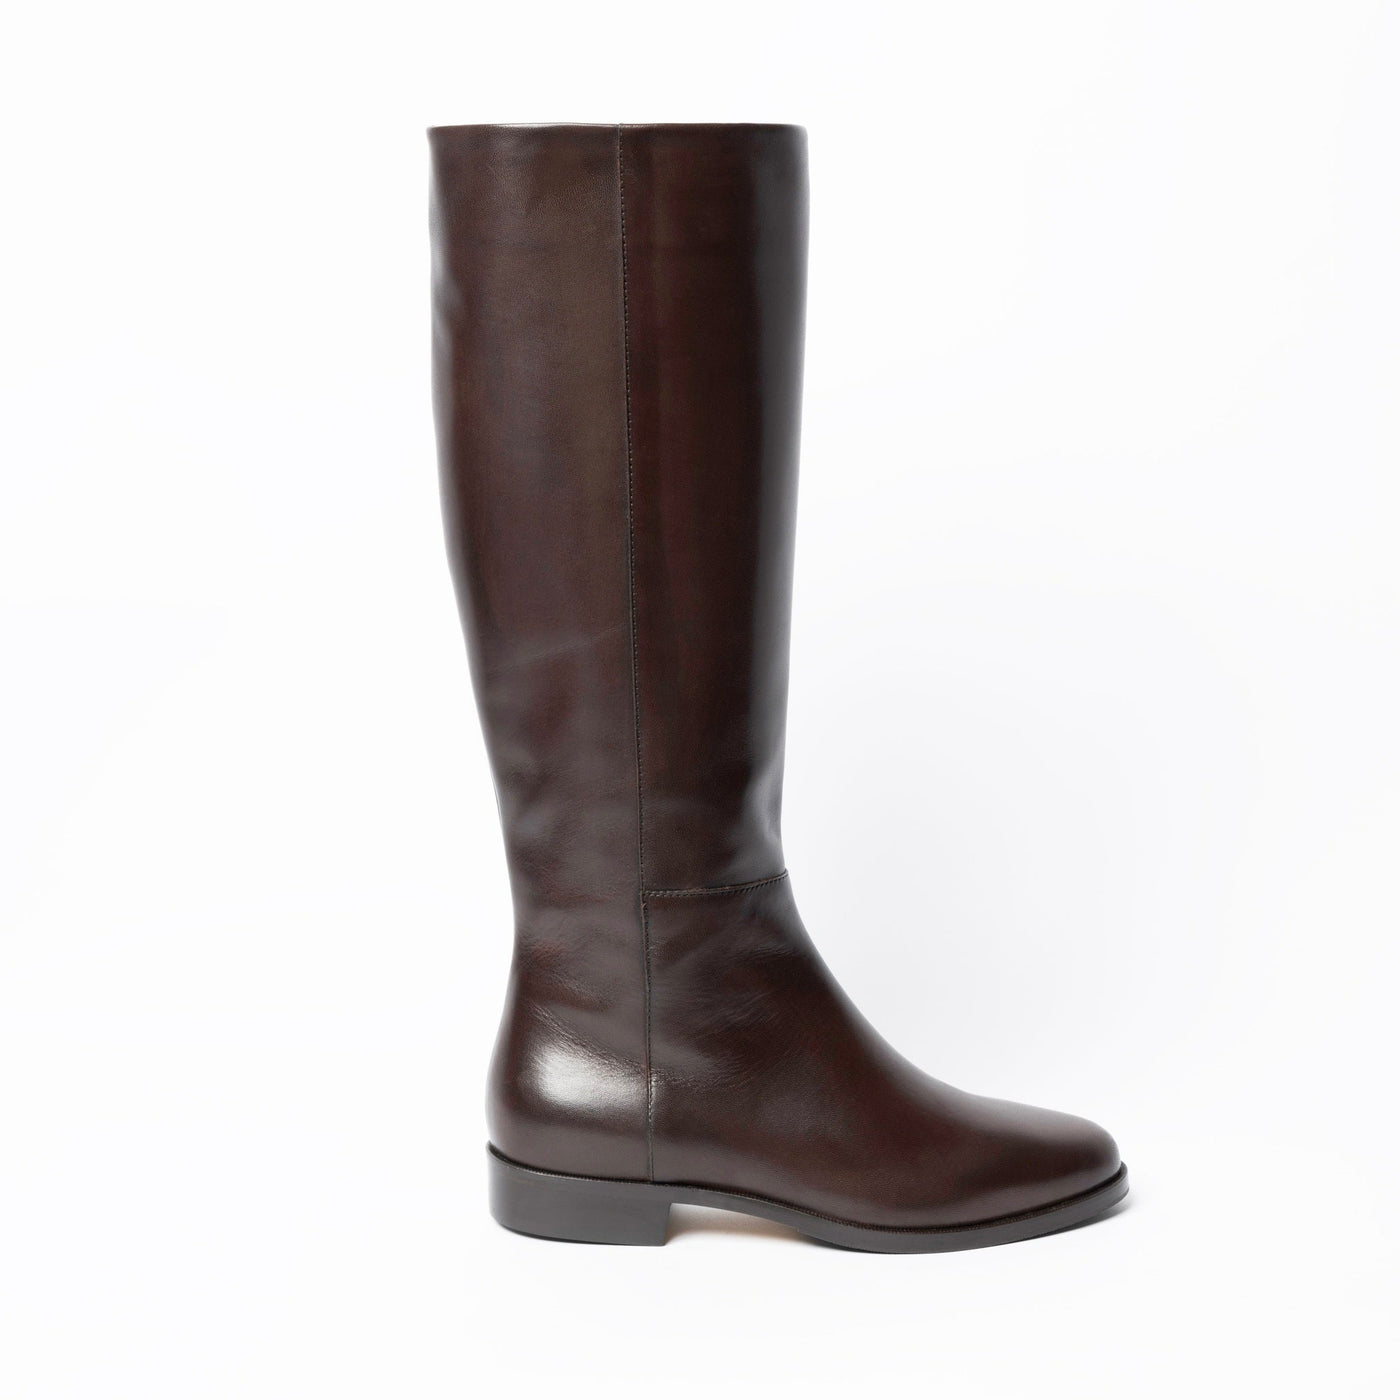 Women's brown leather riding boots. 